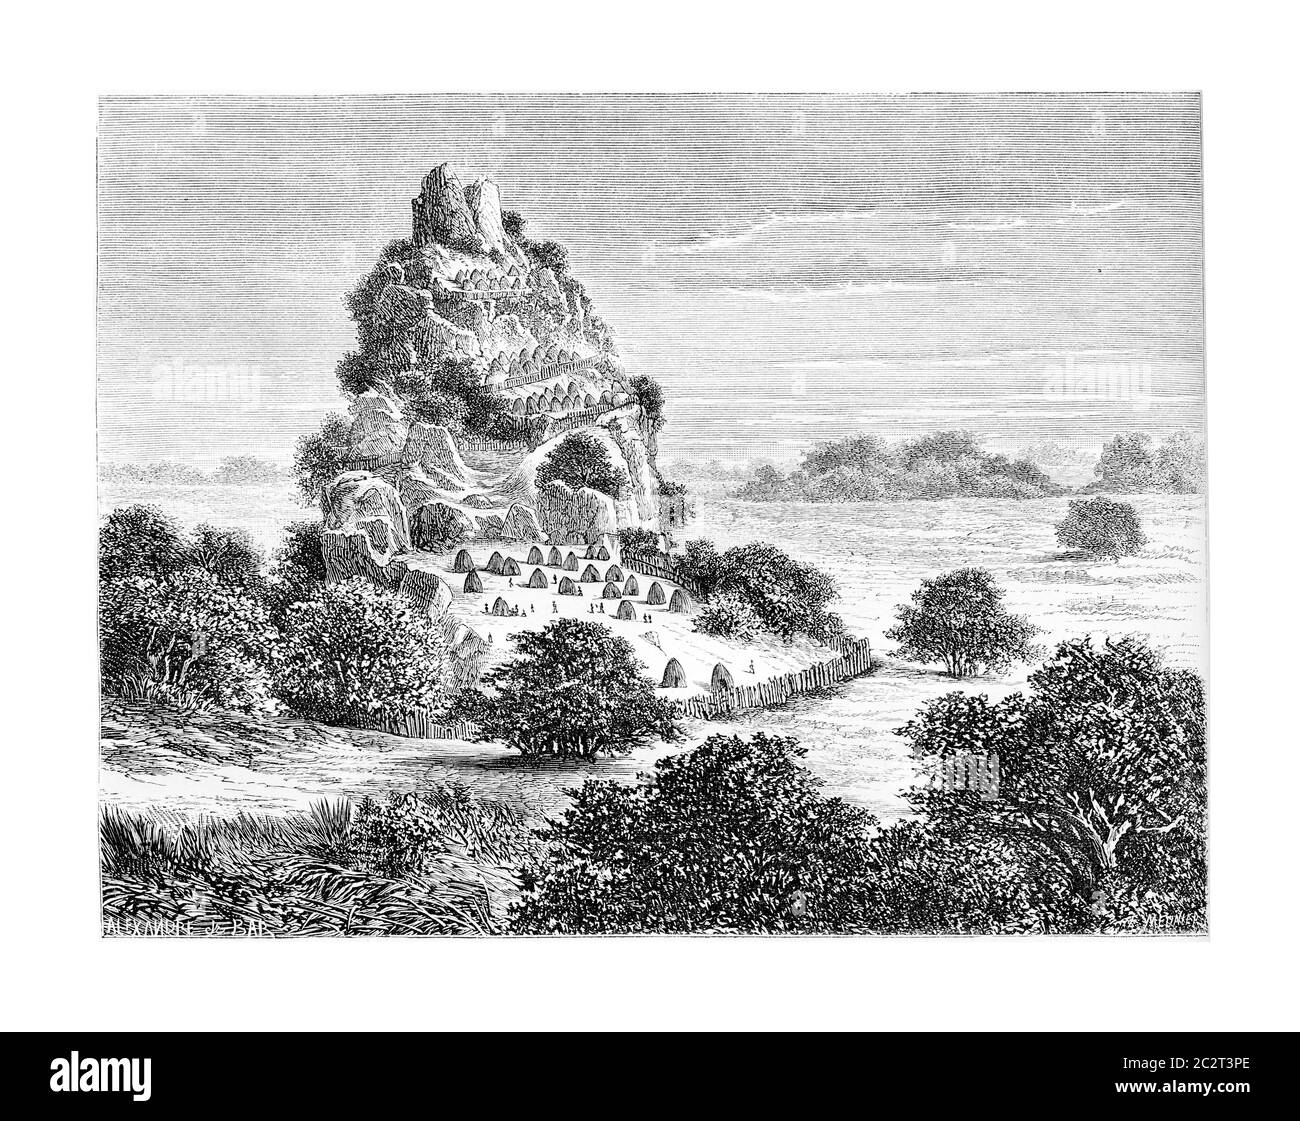 Cingolo, an Ovimbundu Kingdom in Angola, Southern Africa, drawing by De Bar based on a sketch by Serpa Pinto, vintage engraved illustration. Le Tour d Stock Photo